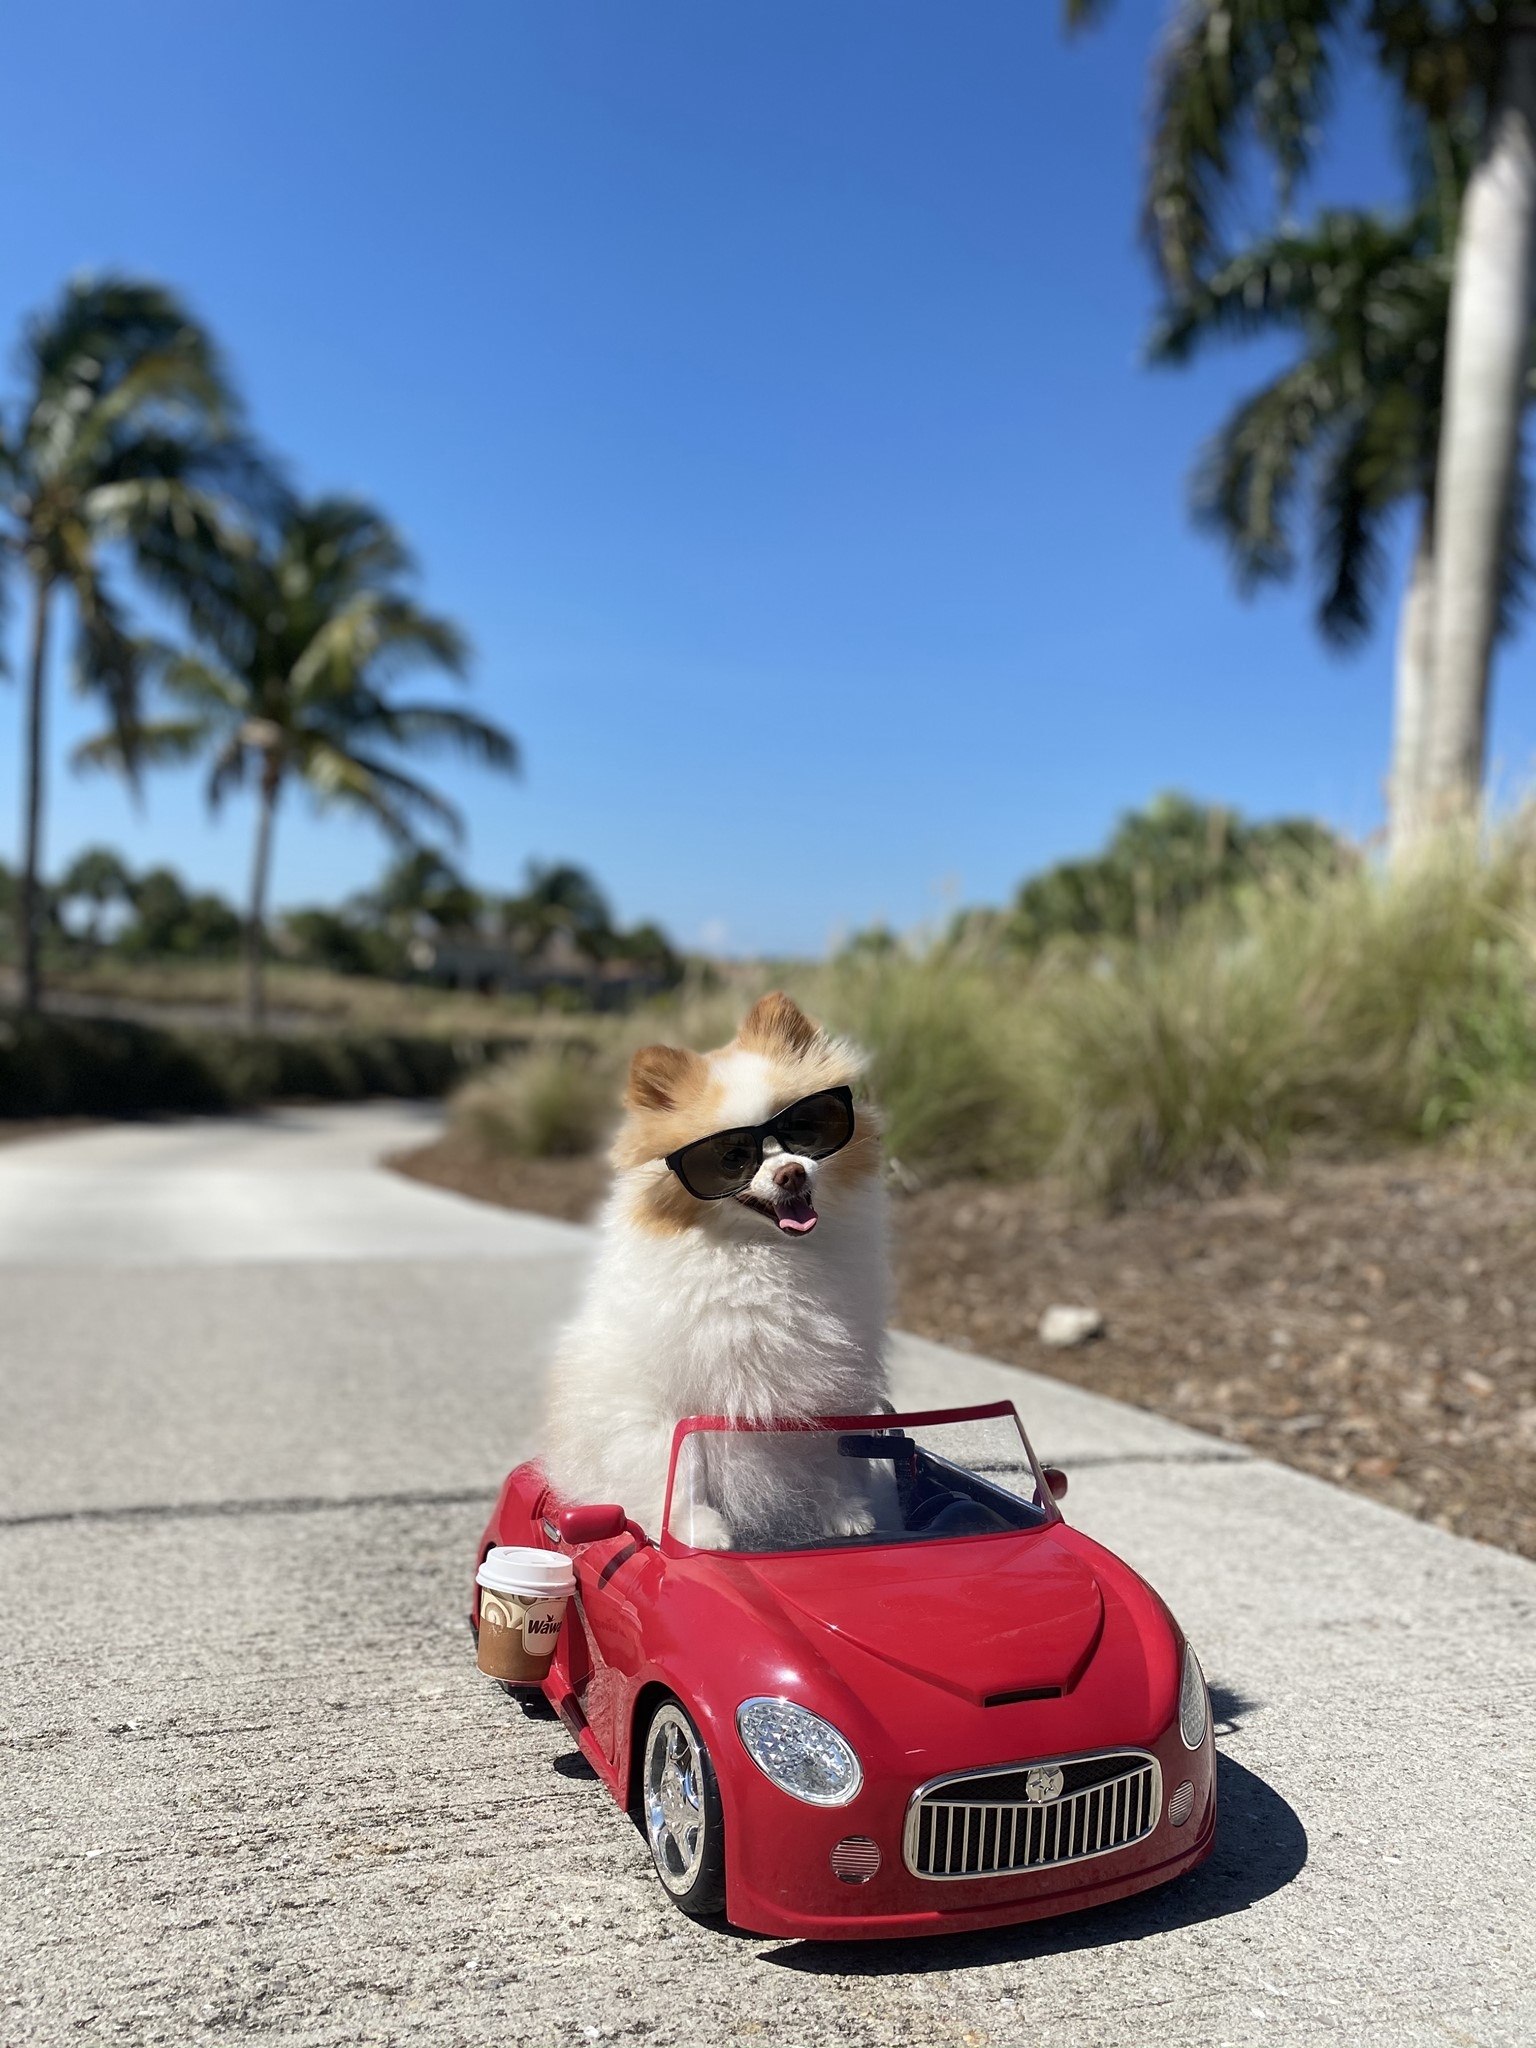 Koda the Fluff in her red convertible